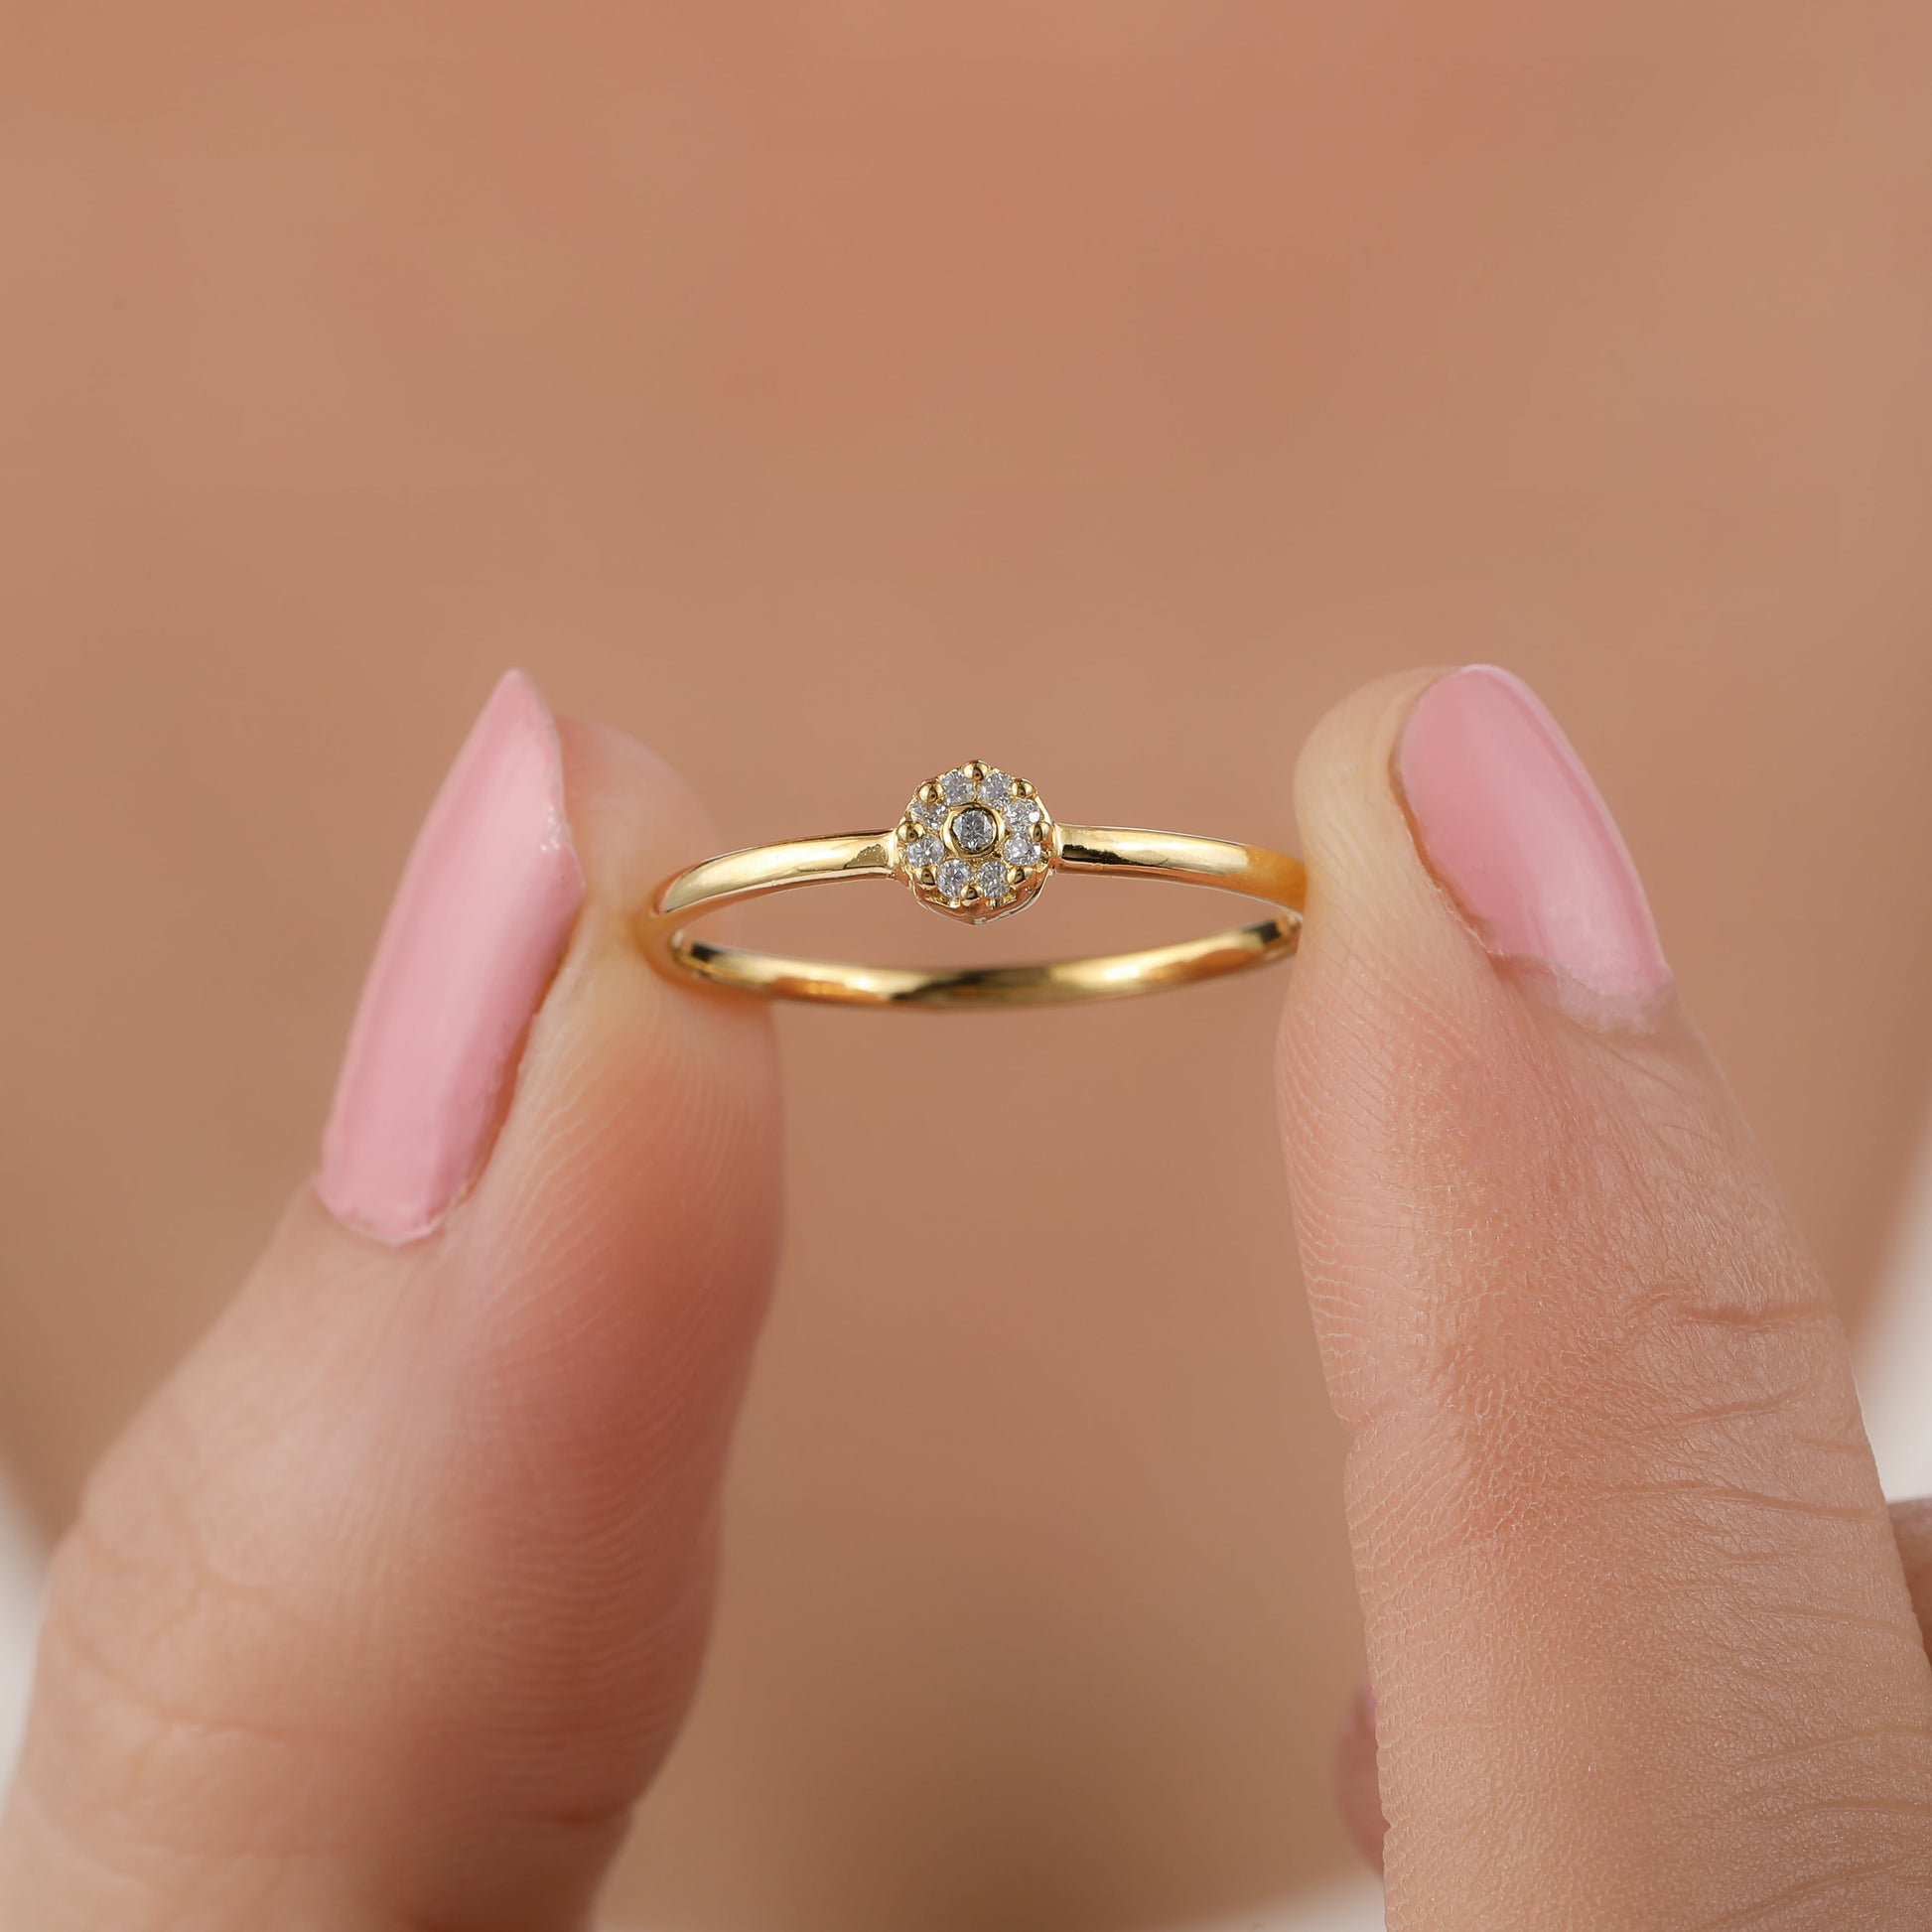 she is holding petite cluster diamond ring